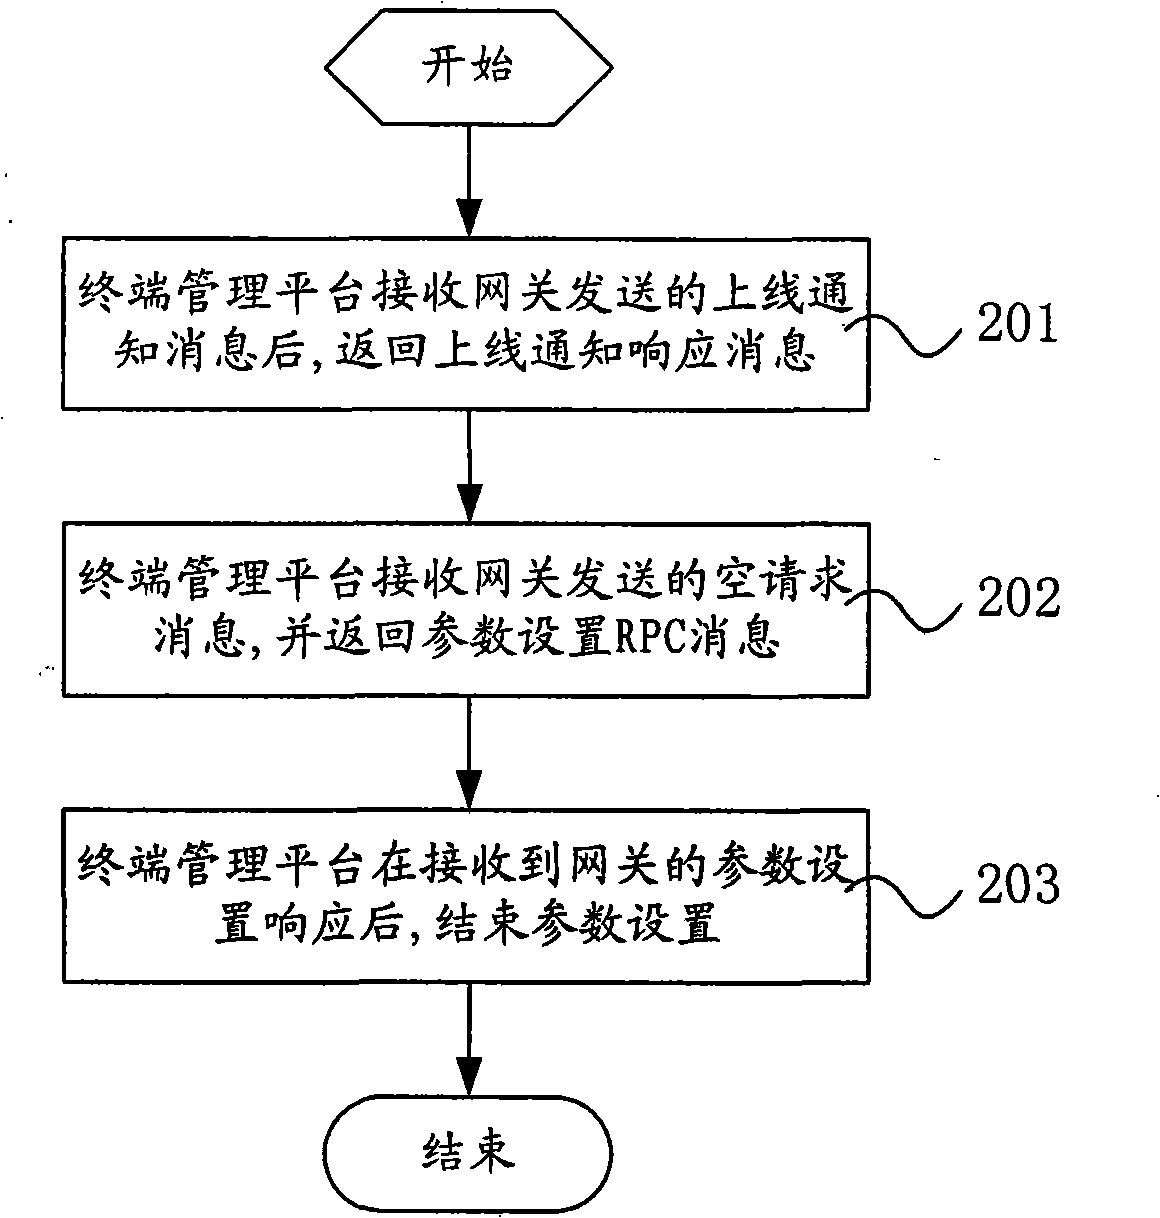 Remote management method and system for equipment alarm information